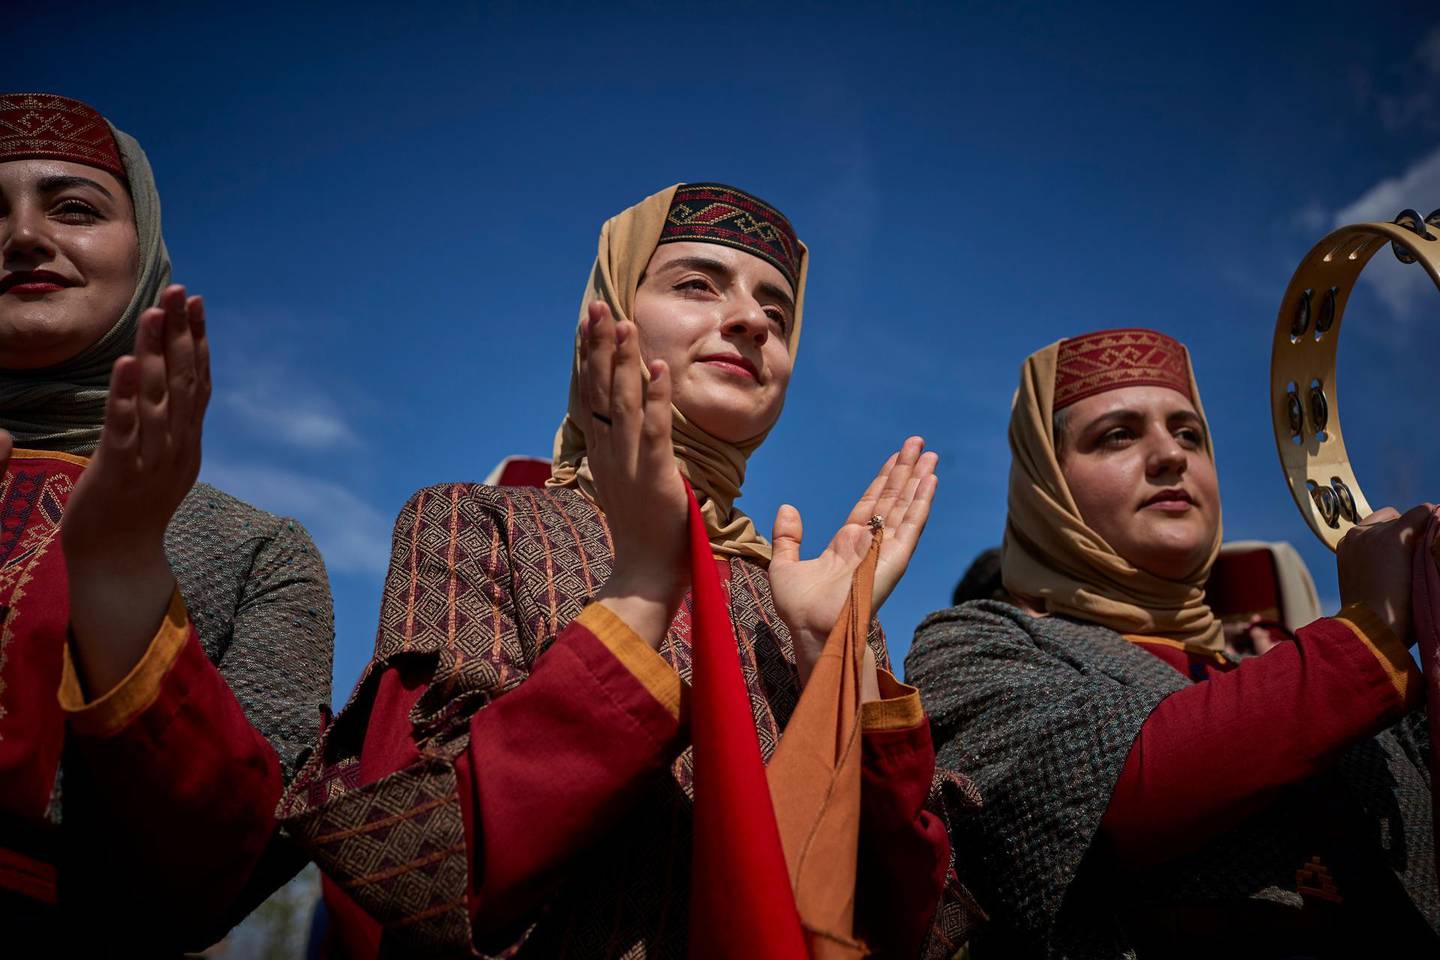 AKNALICH, ARMENIA - APRIL 14: Armenians mark the Yazidi New Year at the Quba Mere Diwane Temple, the worldÕs largest Yazidi Temple, on April 14, 2021 in Aknalich, Armenia. According to the 2011 census, there are 35,272 Yazidis in Armenia, making them Armenia's largest ethnic minority group. Photo by Kiran Ridley